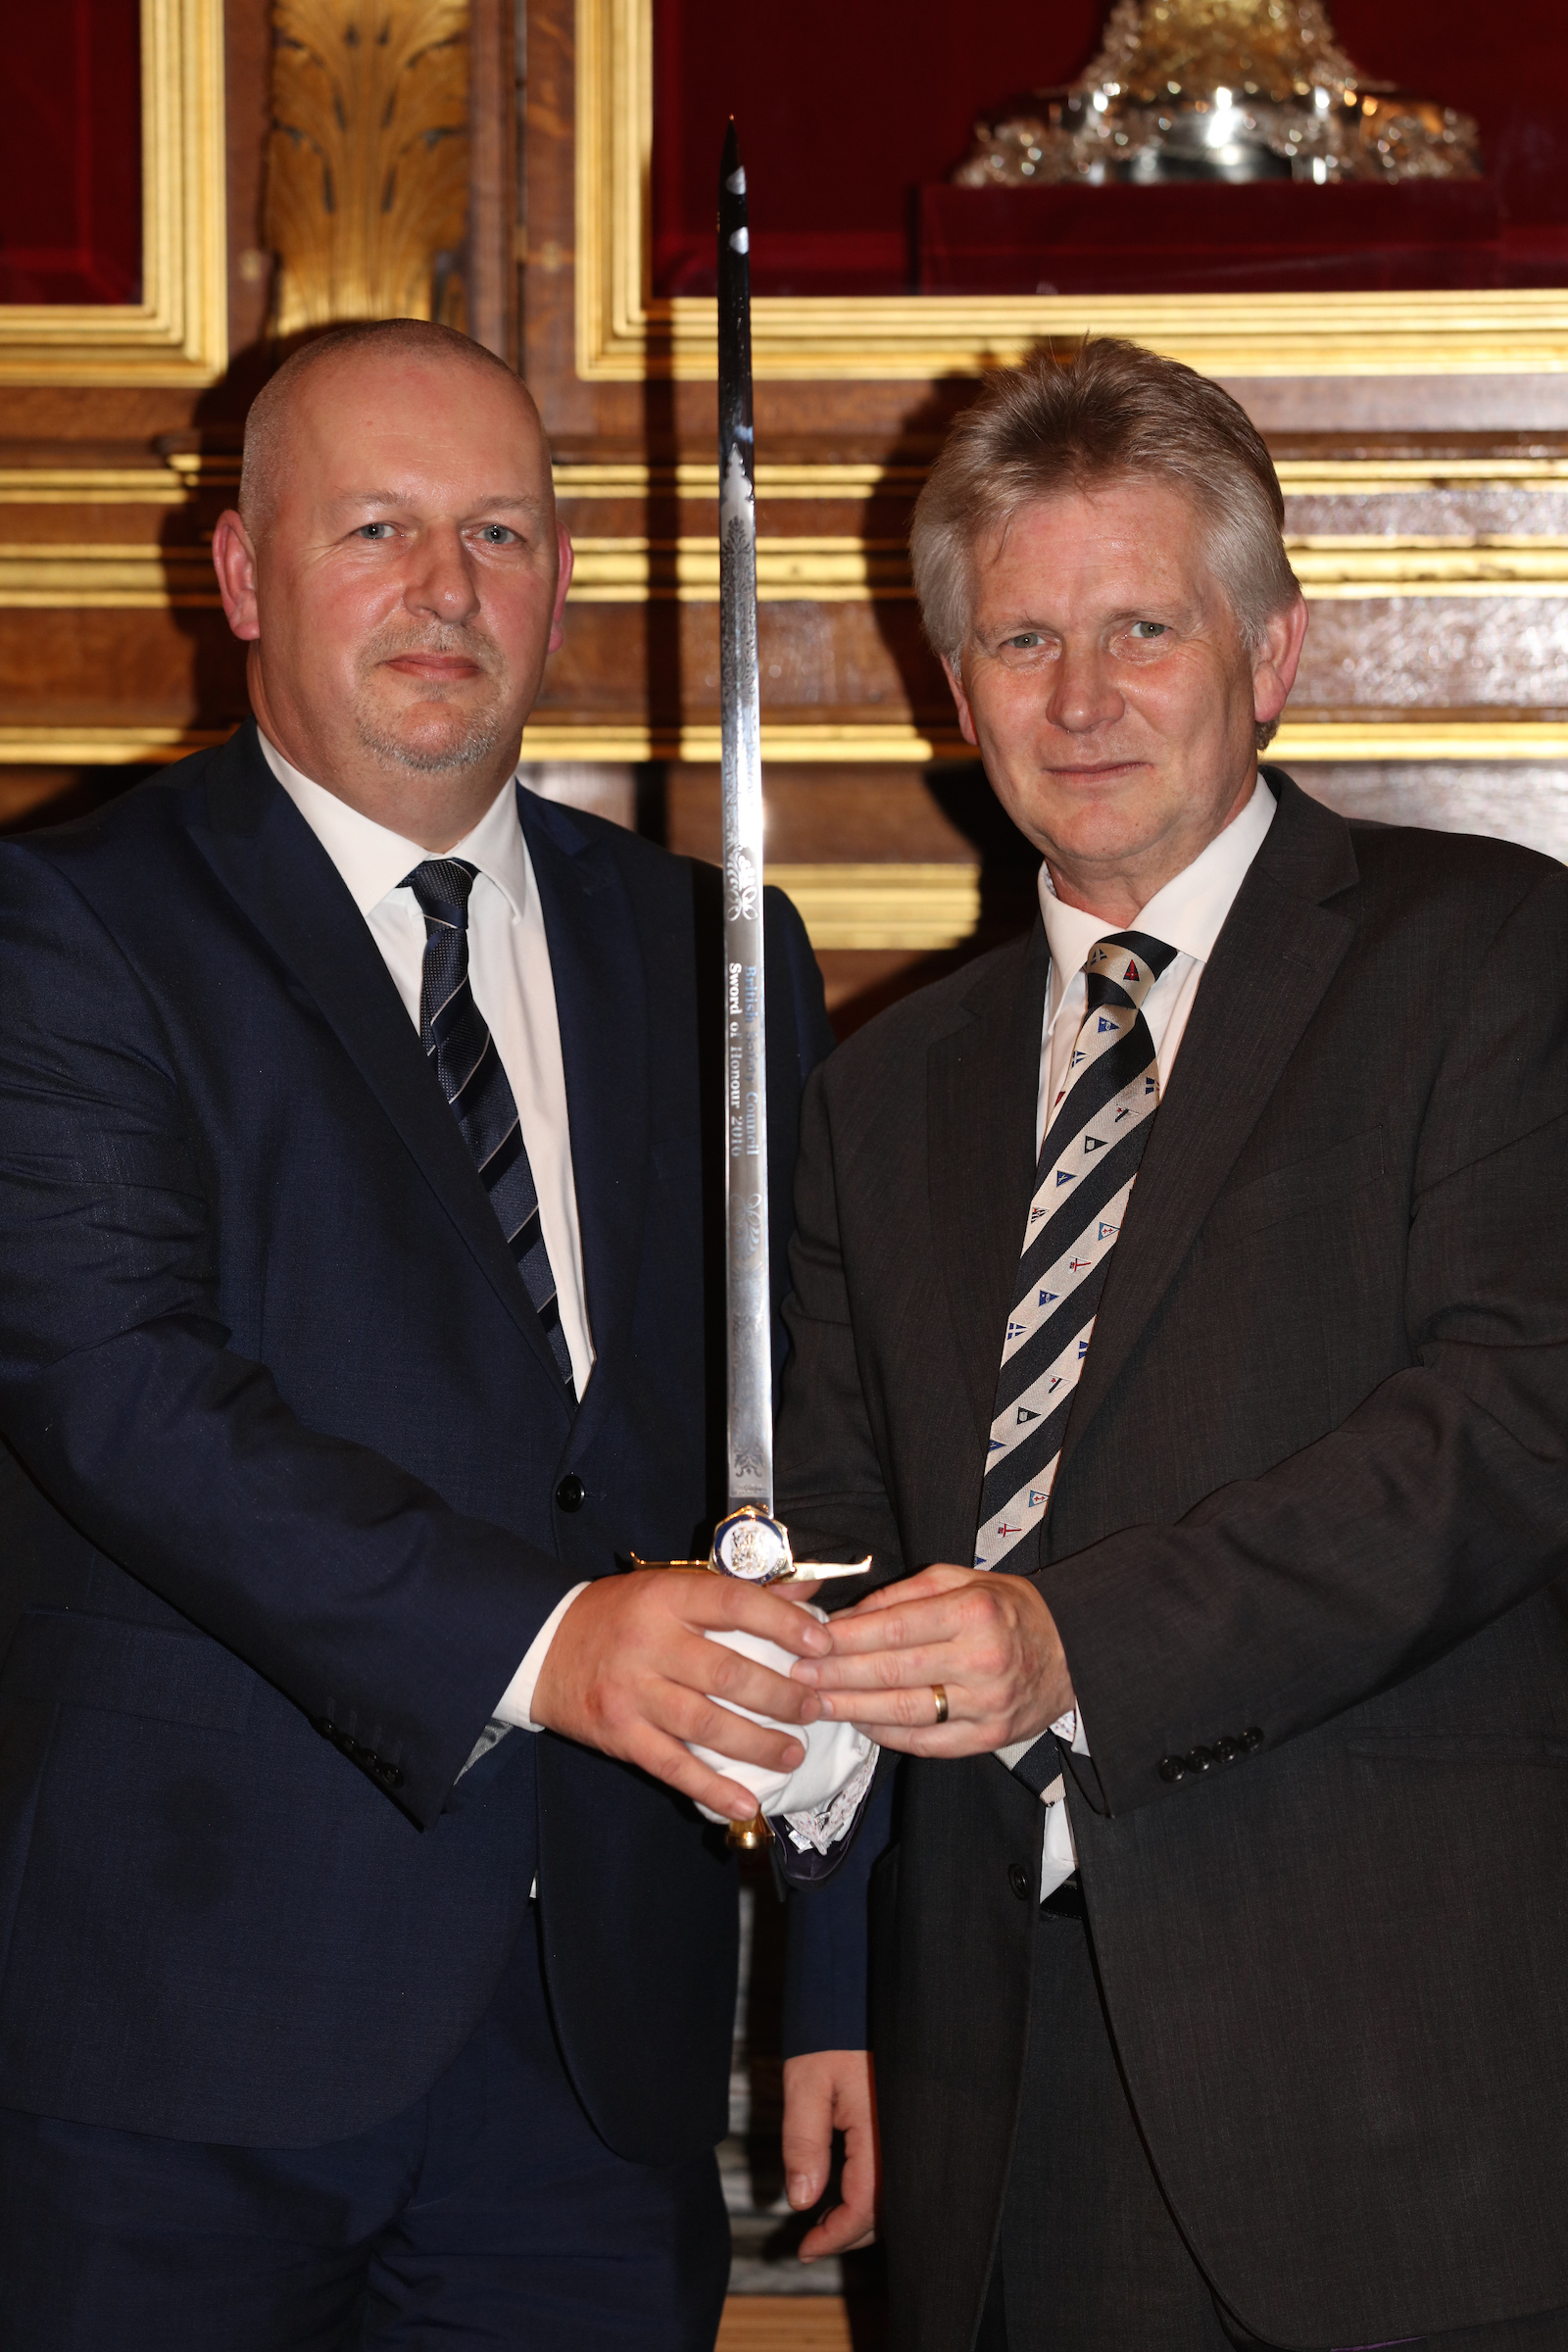 National Express has been awarded the highest safety award in the UK - the Sword of Honour - by the British Safety Council